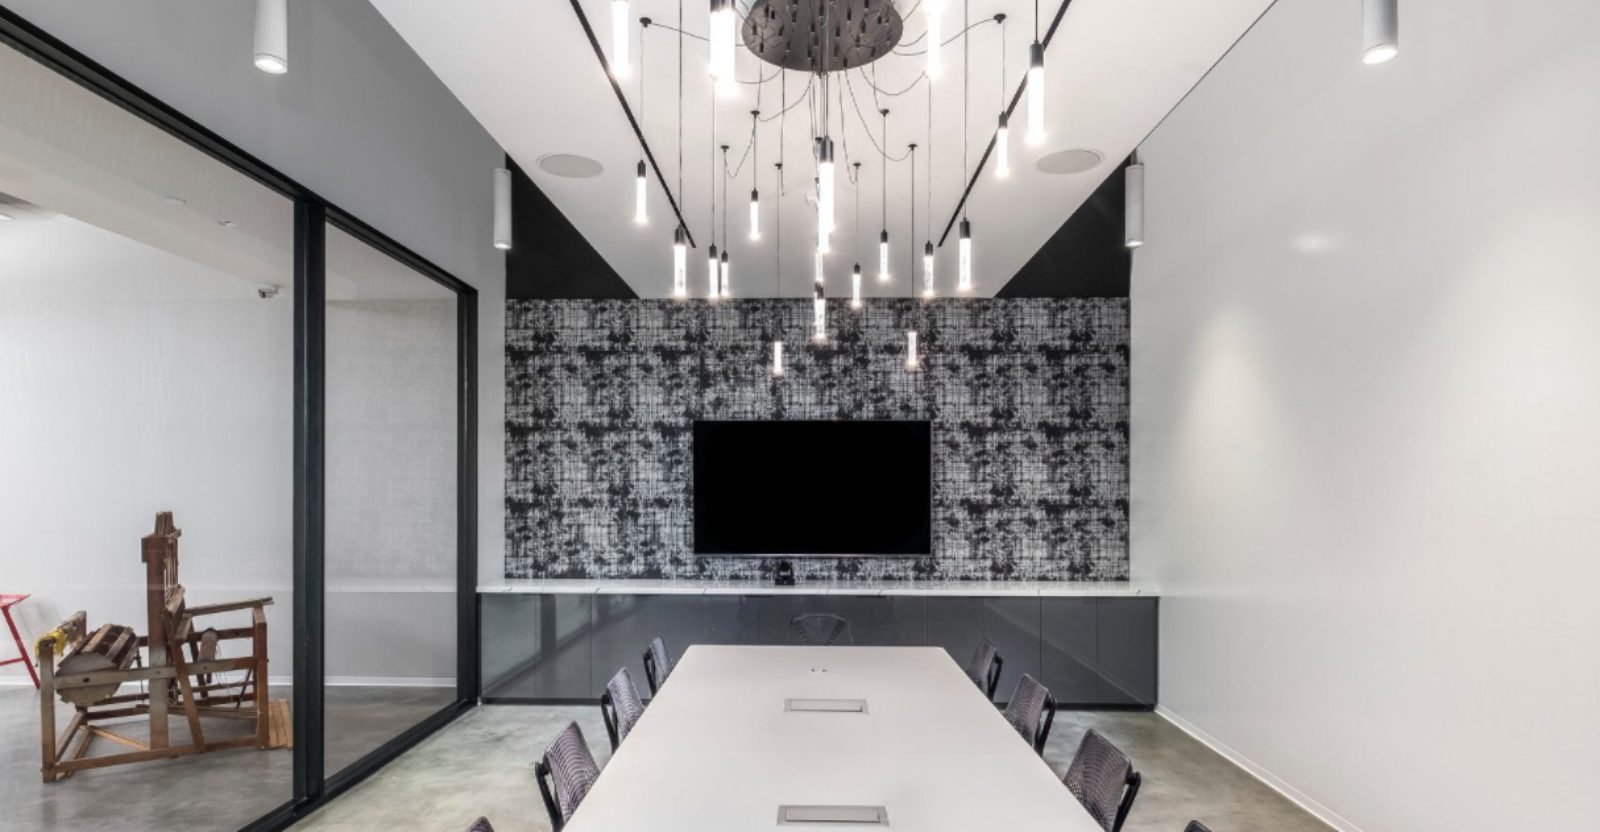 Stylish meeting room: white conference table, screen wall backdrop, and elegant chandelier illuminating the space.